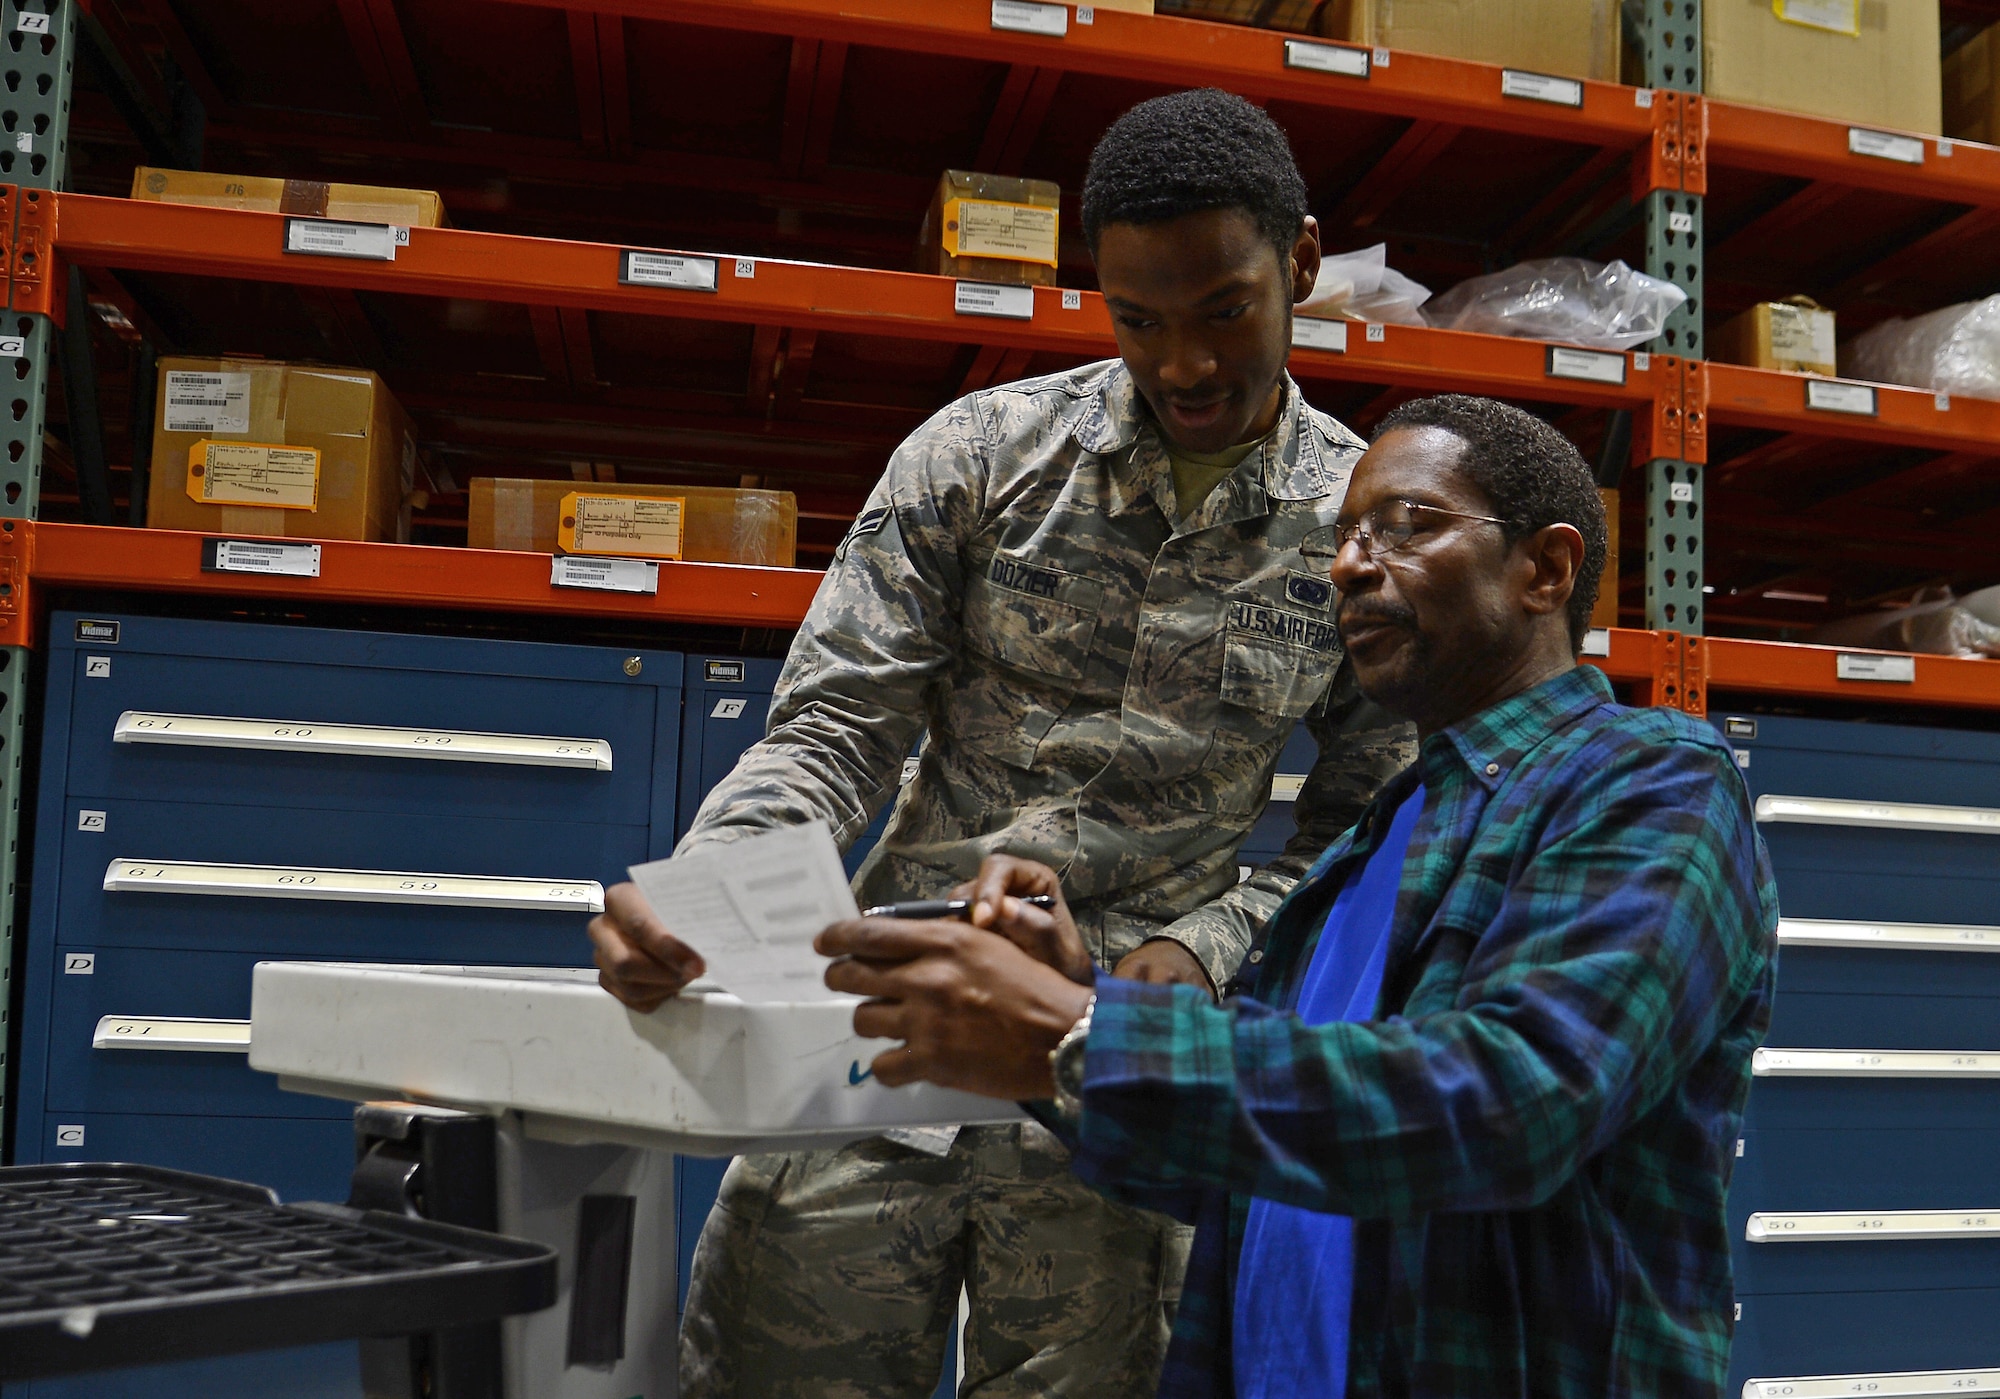 Airman 1st Class Joshua Dozier and Ronald Hines, 627th Logistics Readiness Squadron supply technicians, reviews a document before pulling an item off the warehouse shelf Oct. 19, 2018 at Joint Base Lewis-McChord, Wash.